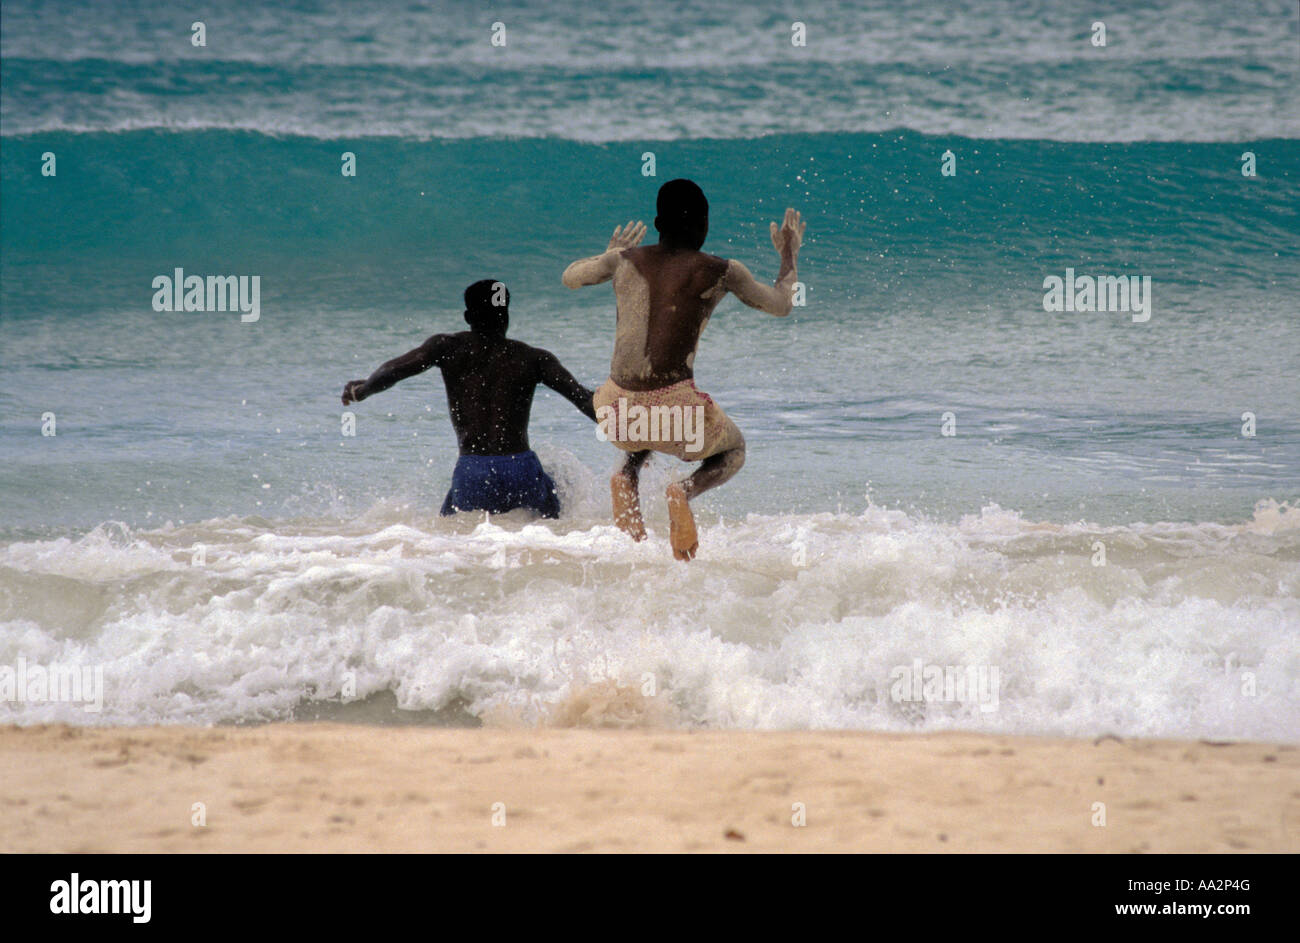 Two men jumping over surging waves and surf or wading into sea, Barbados, West Indies Stock Photo